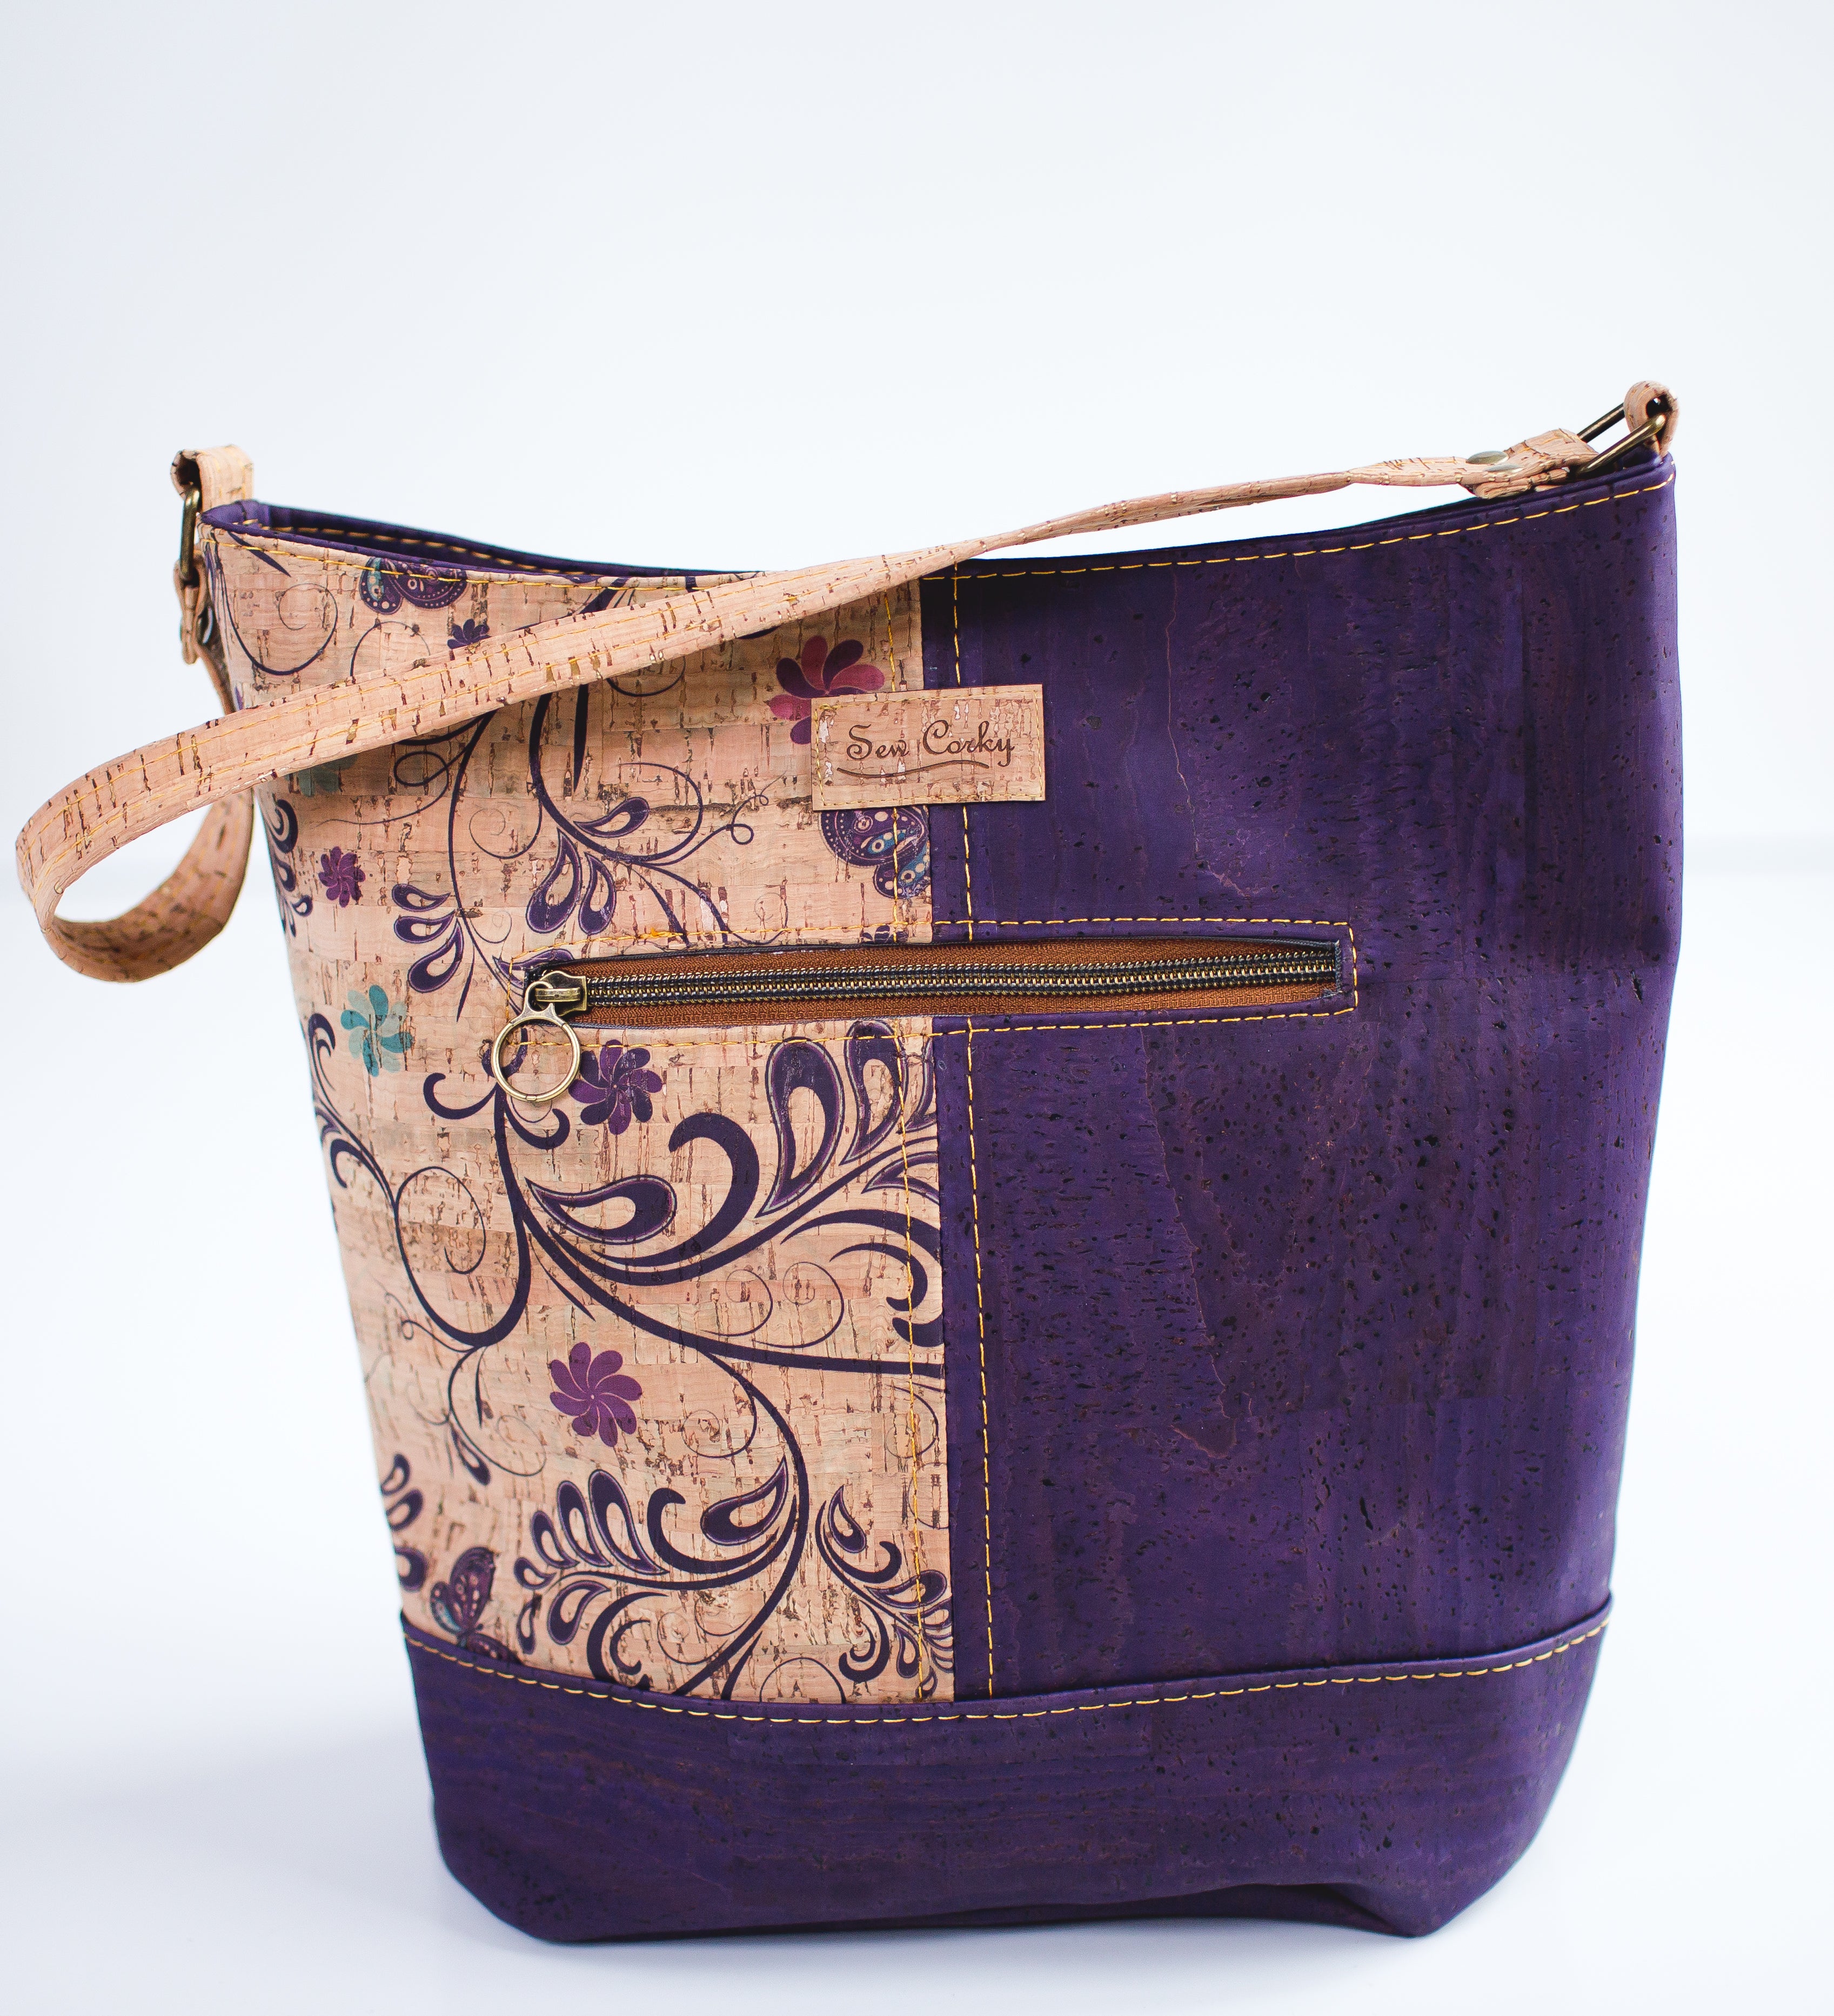 F4-The Norah Bucket Cork Handbag in Eggplant and Butterfly Print